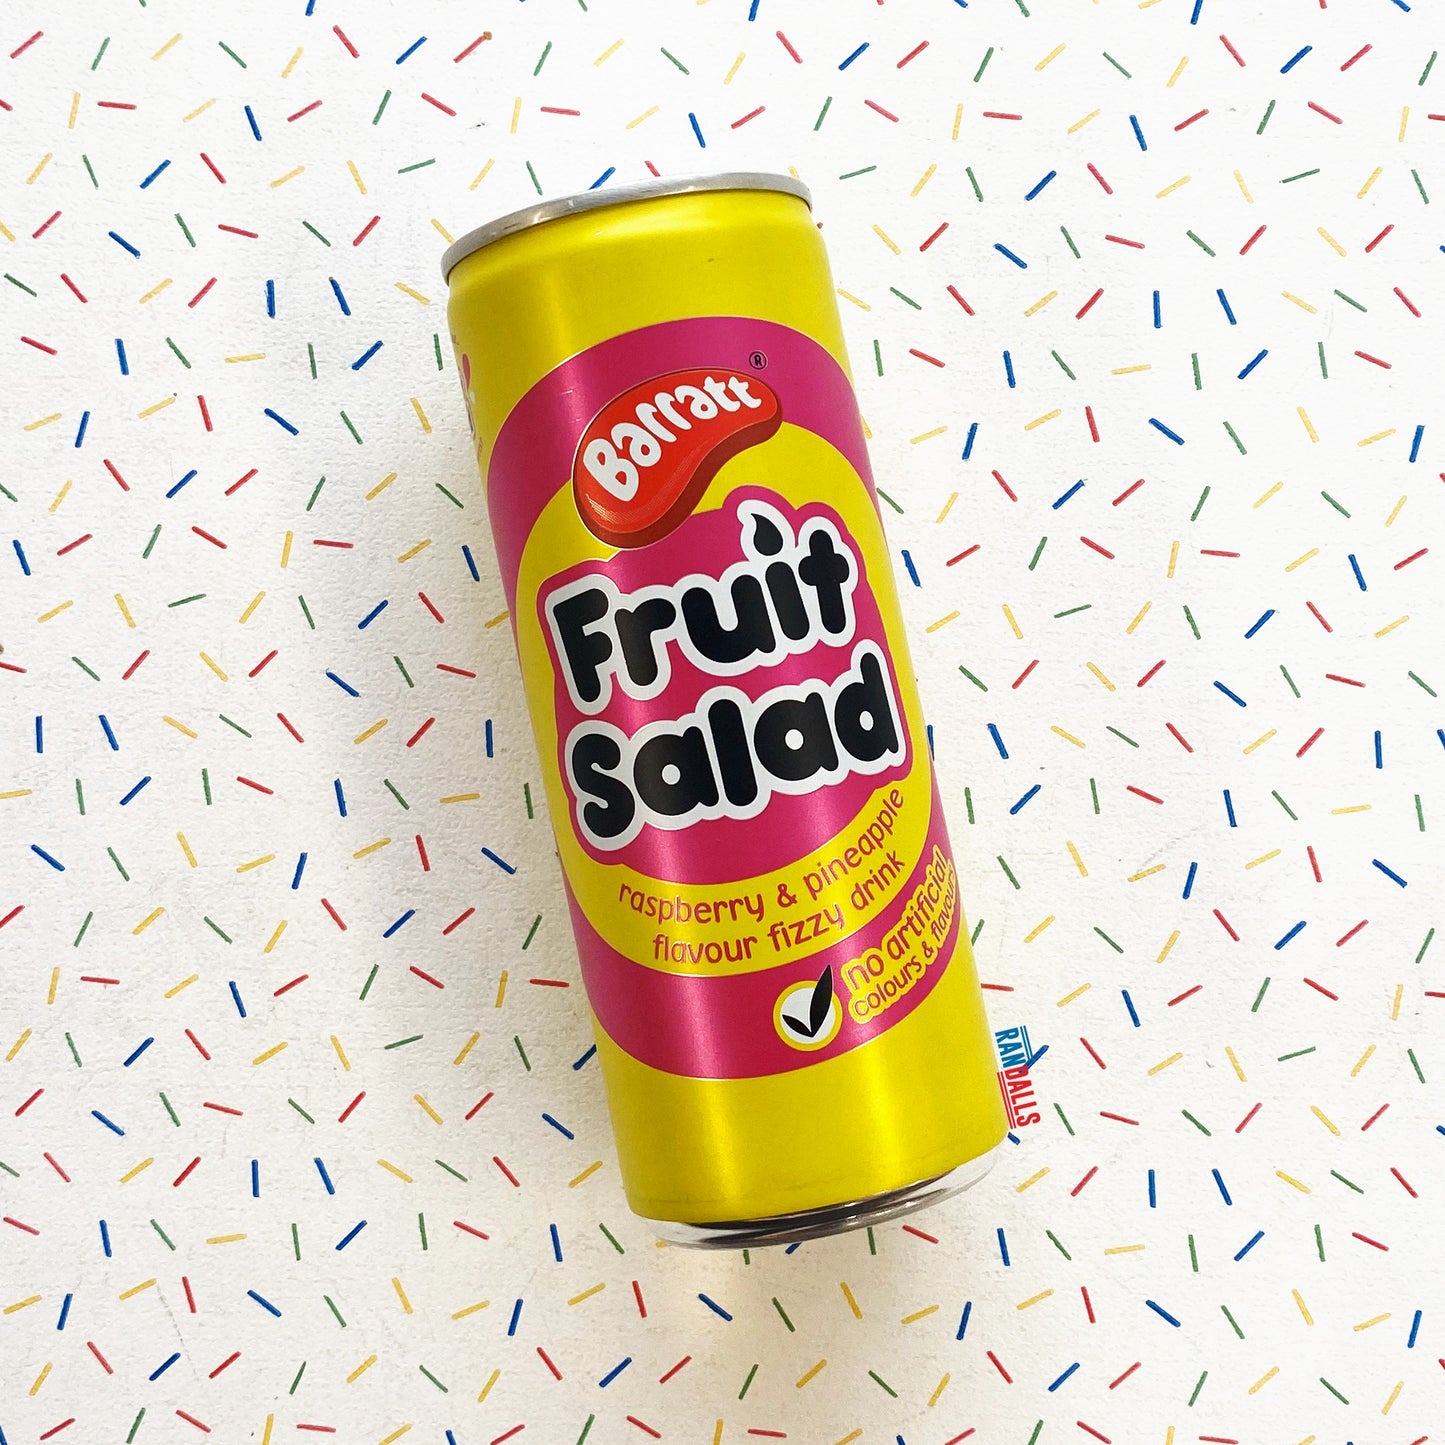 barratt, barratt fruit salad, barratt fruit salad raspberry and pineapple flavour fizzy drink, british sweets, randalls